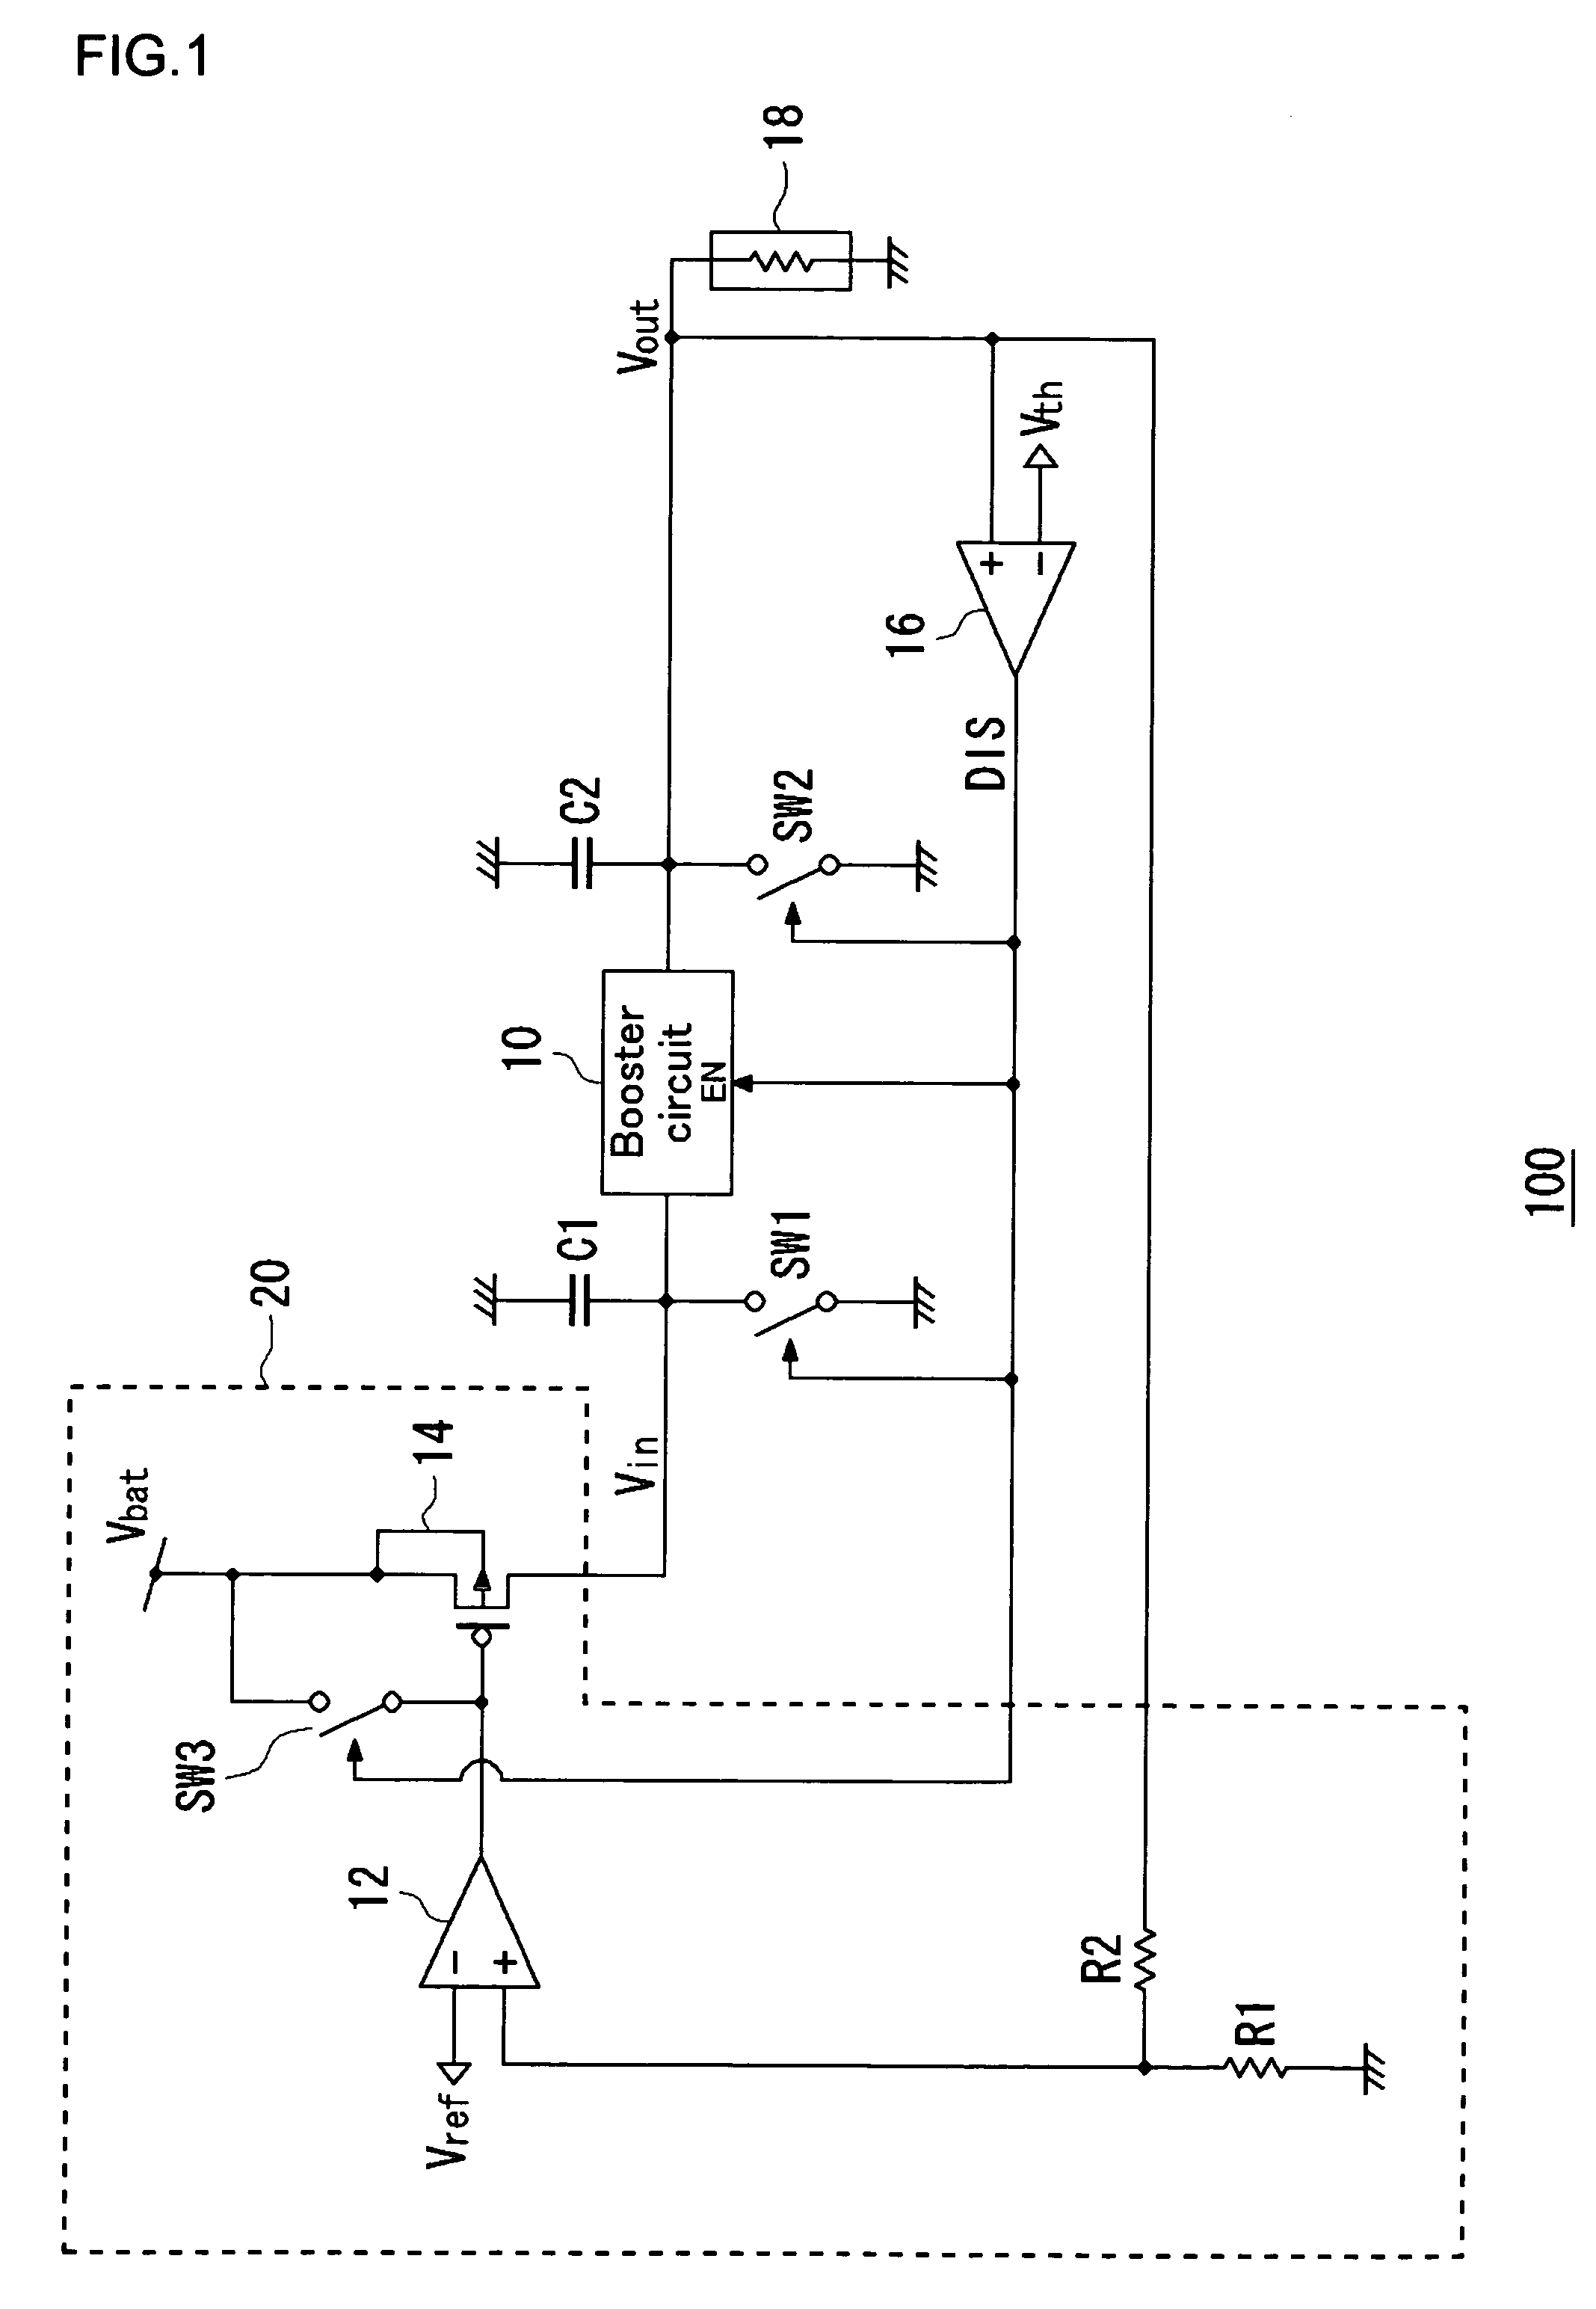 Power supply apparatus provided with regulation function and boosting of a regulated voltage